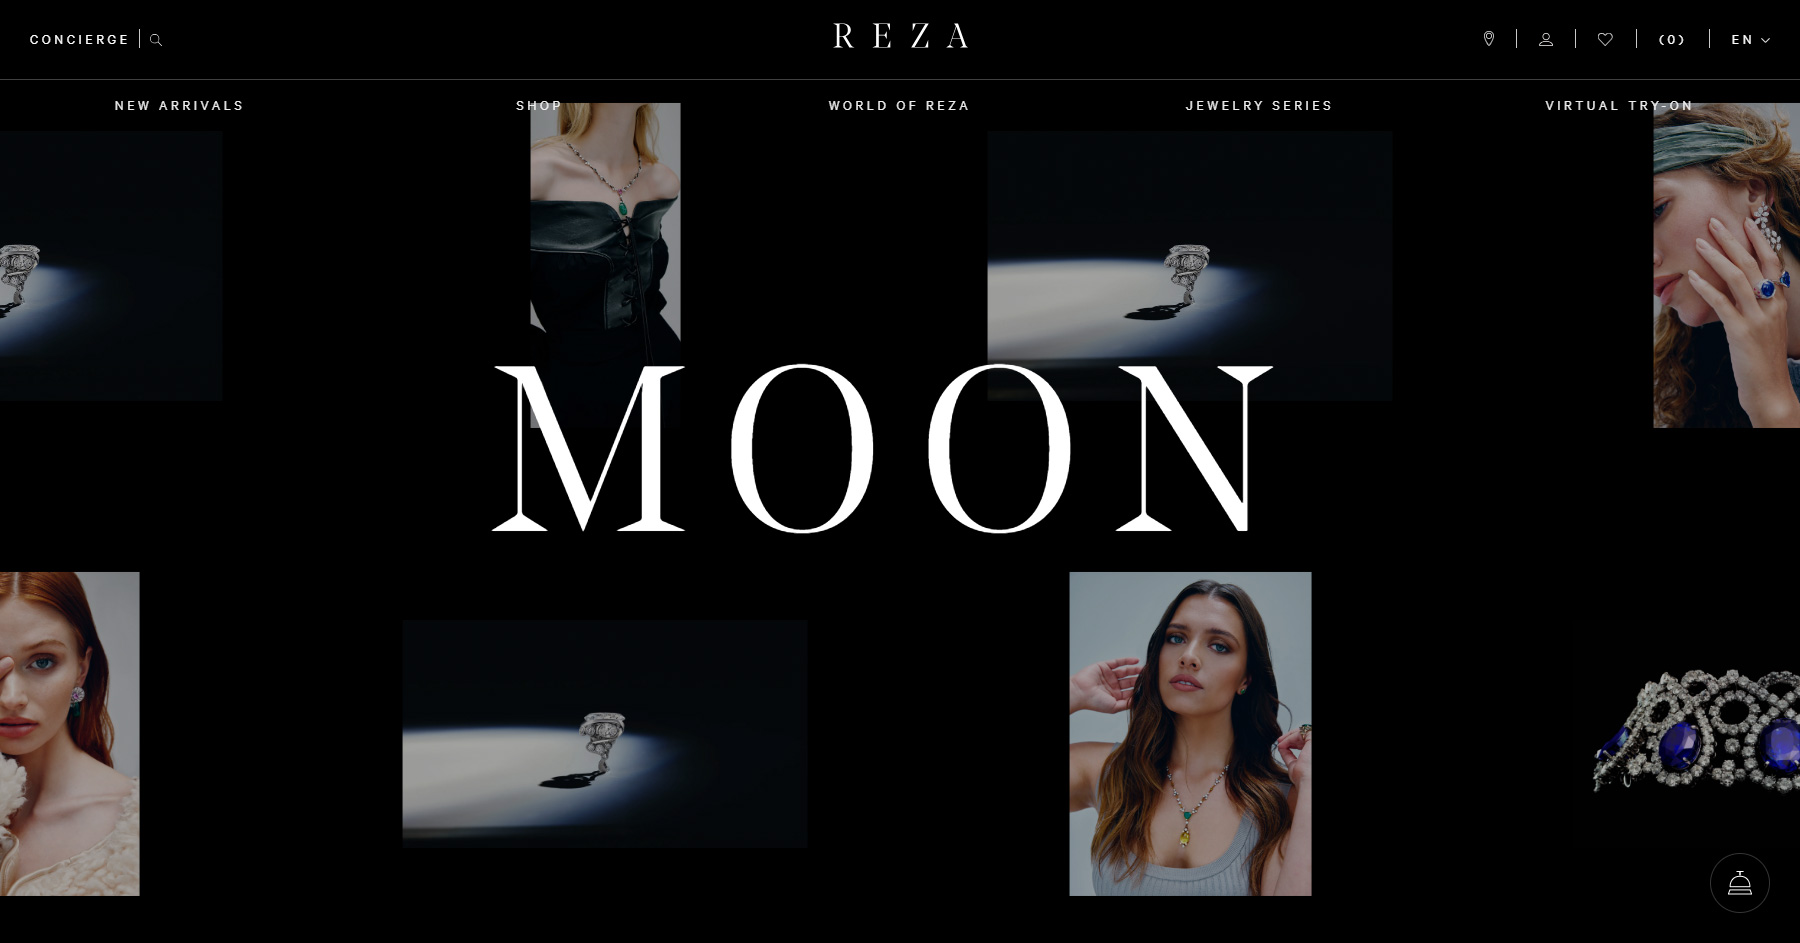 REZA - Website of the Day